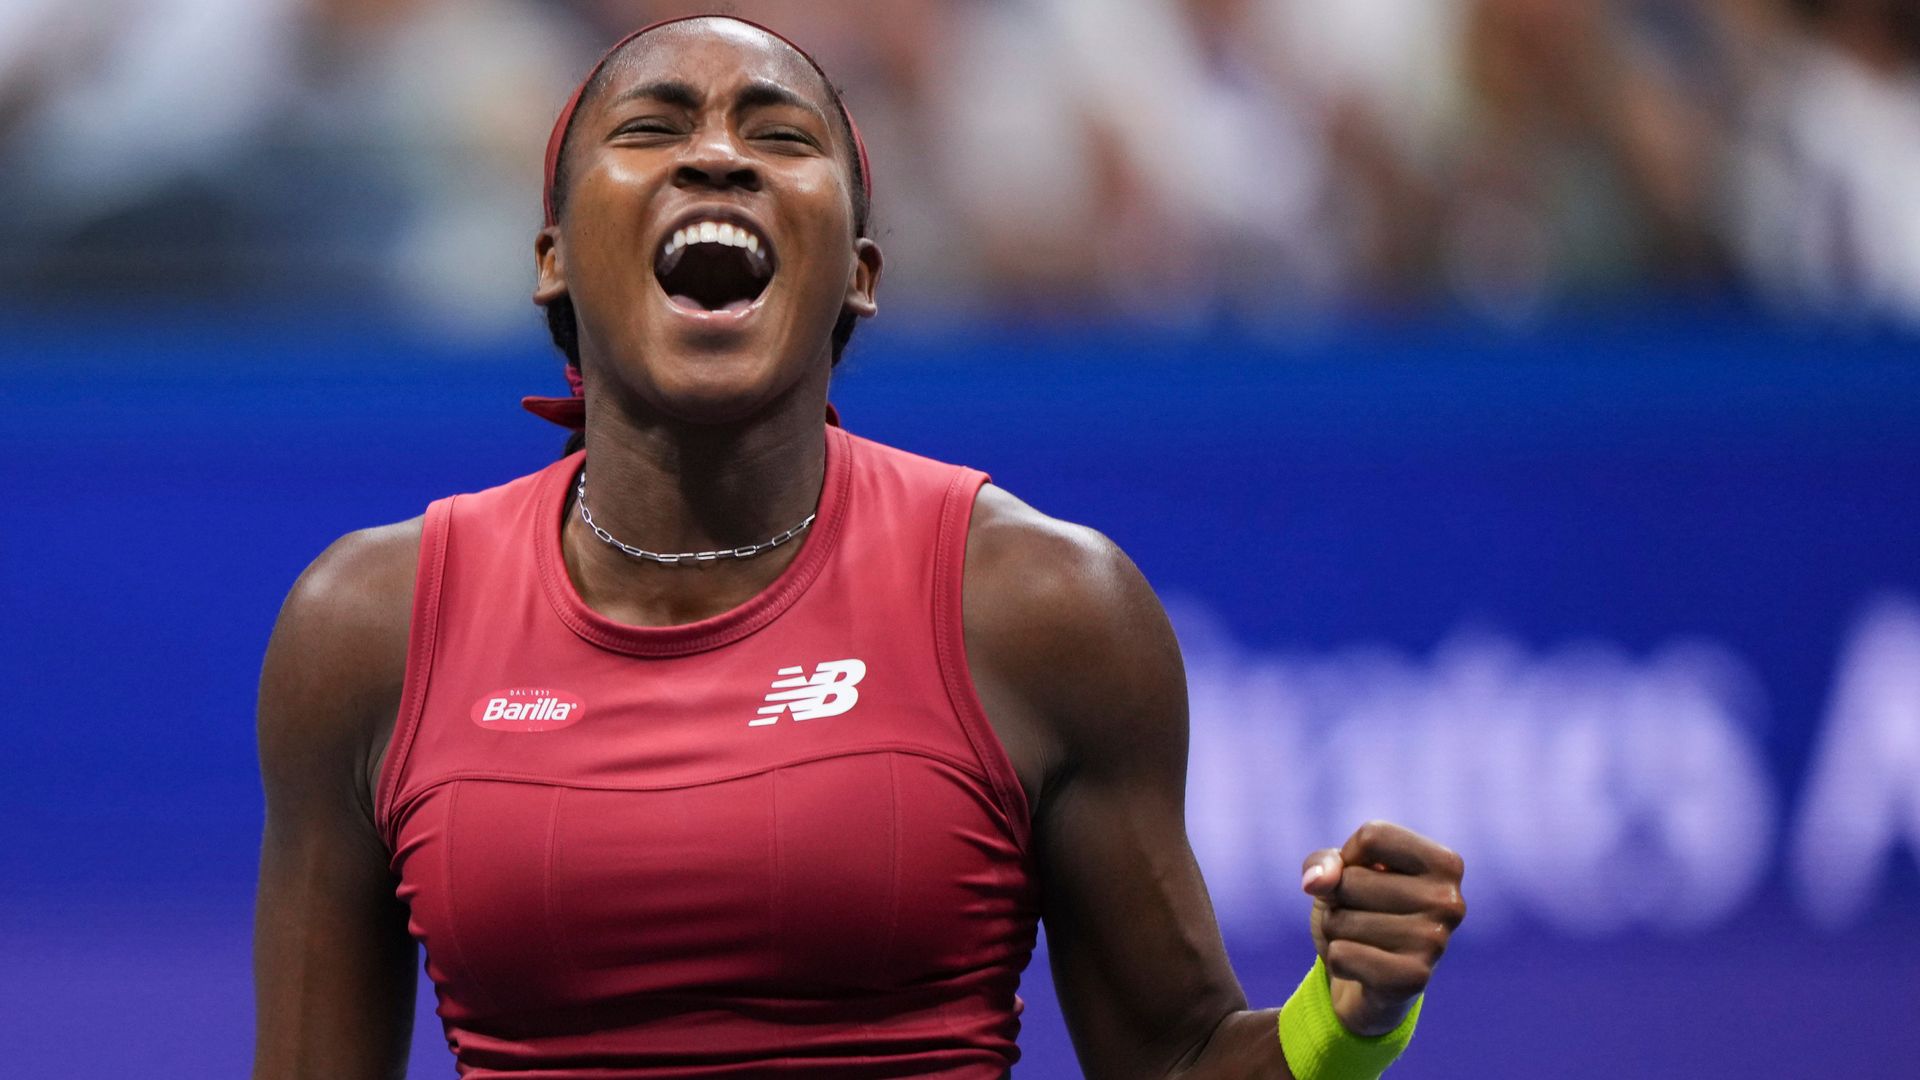 Gauff: I want to win at least 10 Grand Slam titles